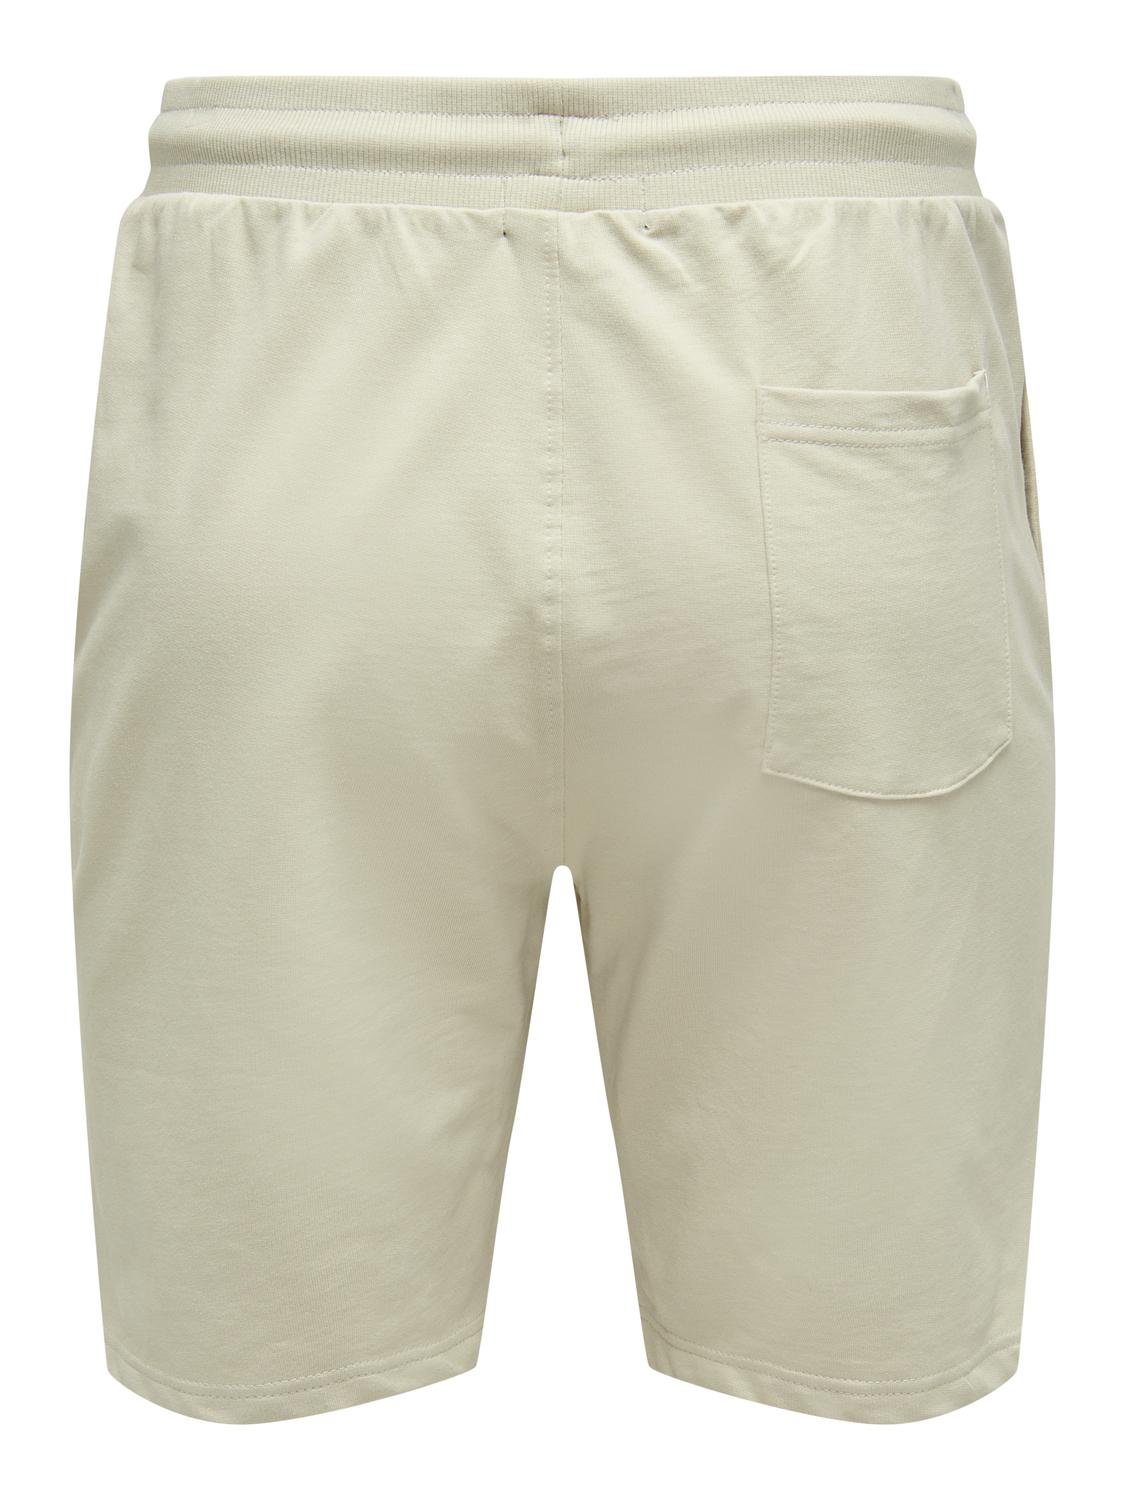 ONLY & SONS Regular Fit Mid waist Shorts -Pelican - 22015623